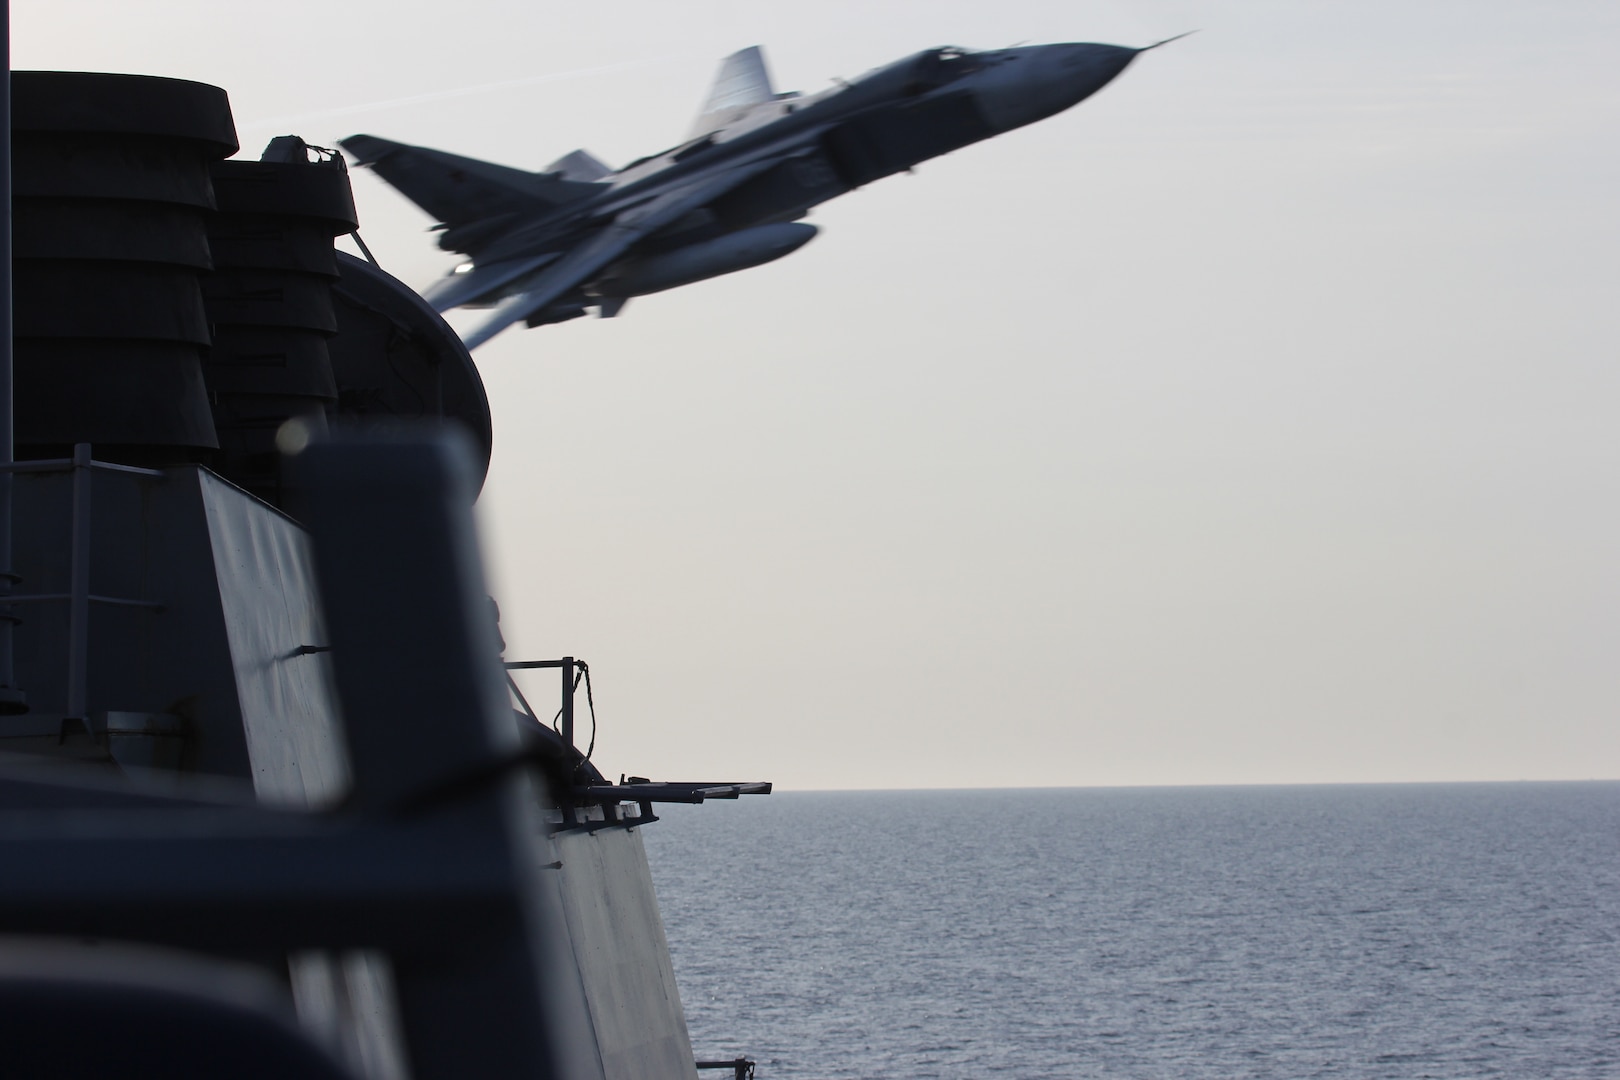 Russian Sukhoi Su-24 attack aircraft makes low-altitude pass by USS Donald Cook as it conducts routine patrol in U.S. 6th Fleet area of operations, Baltic
Sea, April 12, 2016 (U.S. Navy)